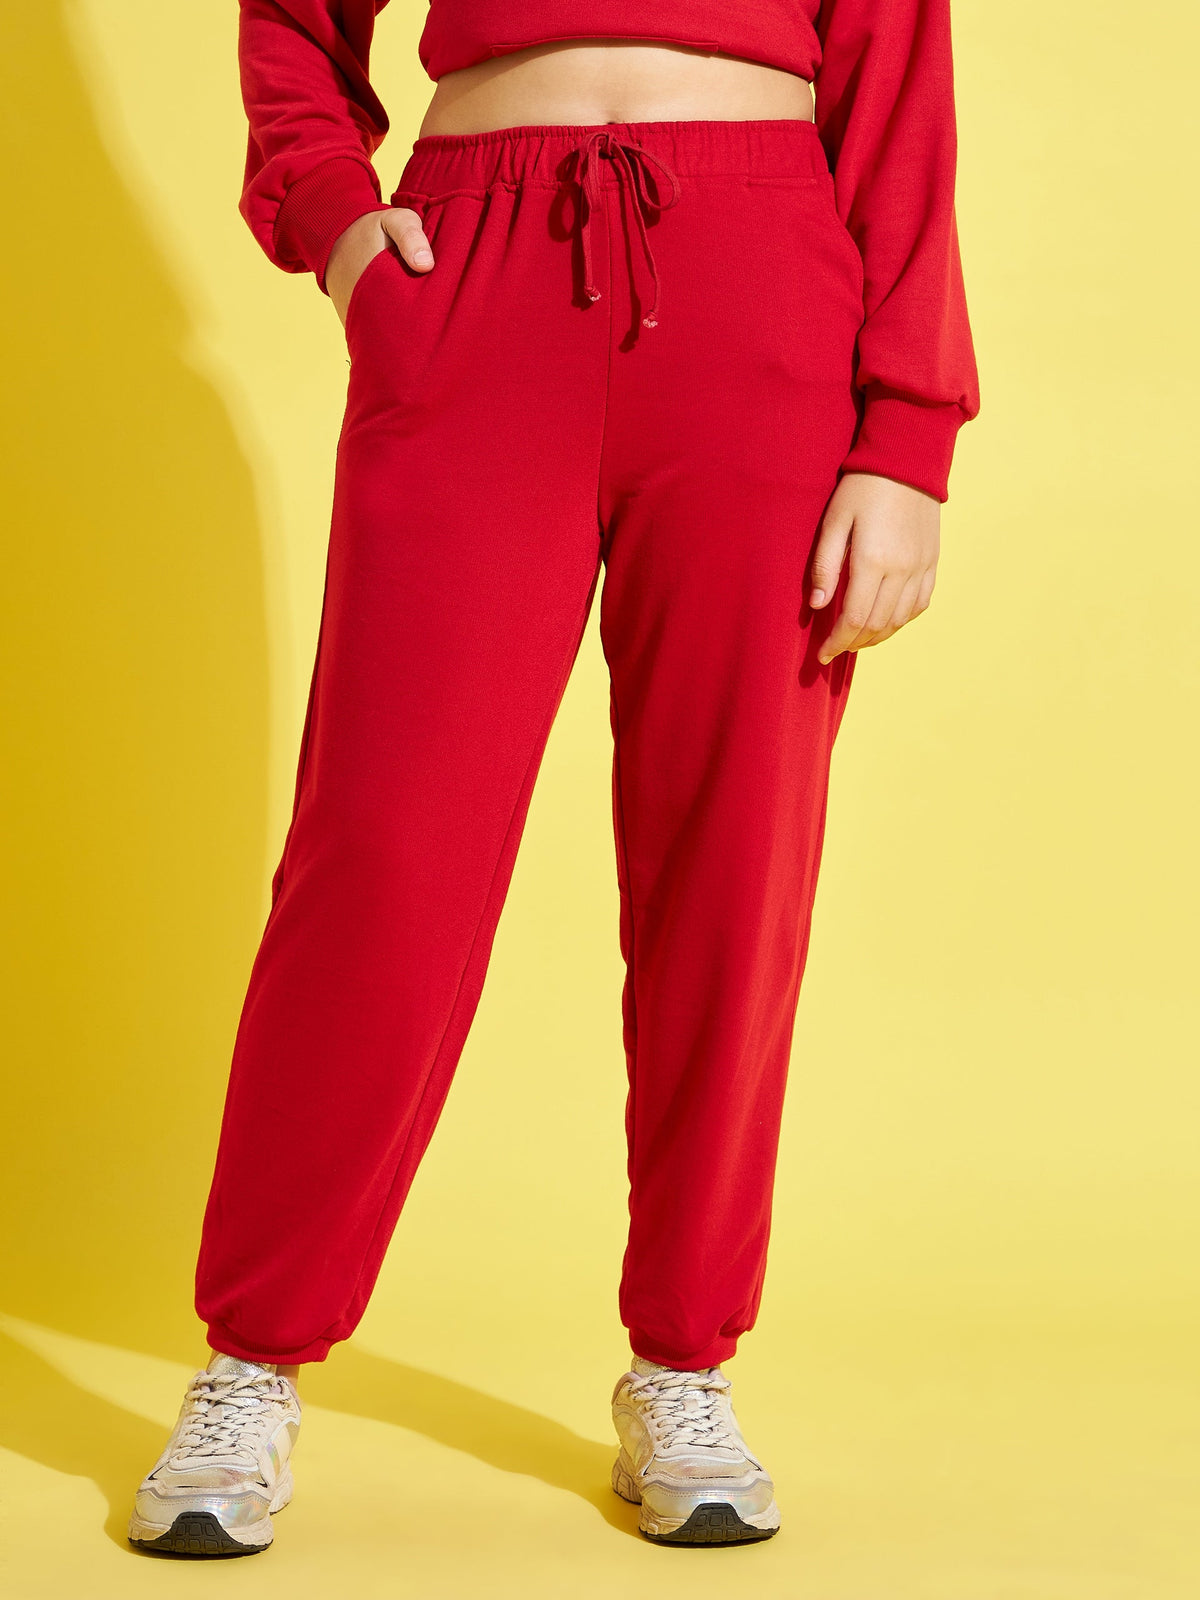 Red Solid Basic Joggers-Noh.Voh